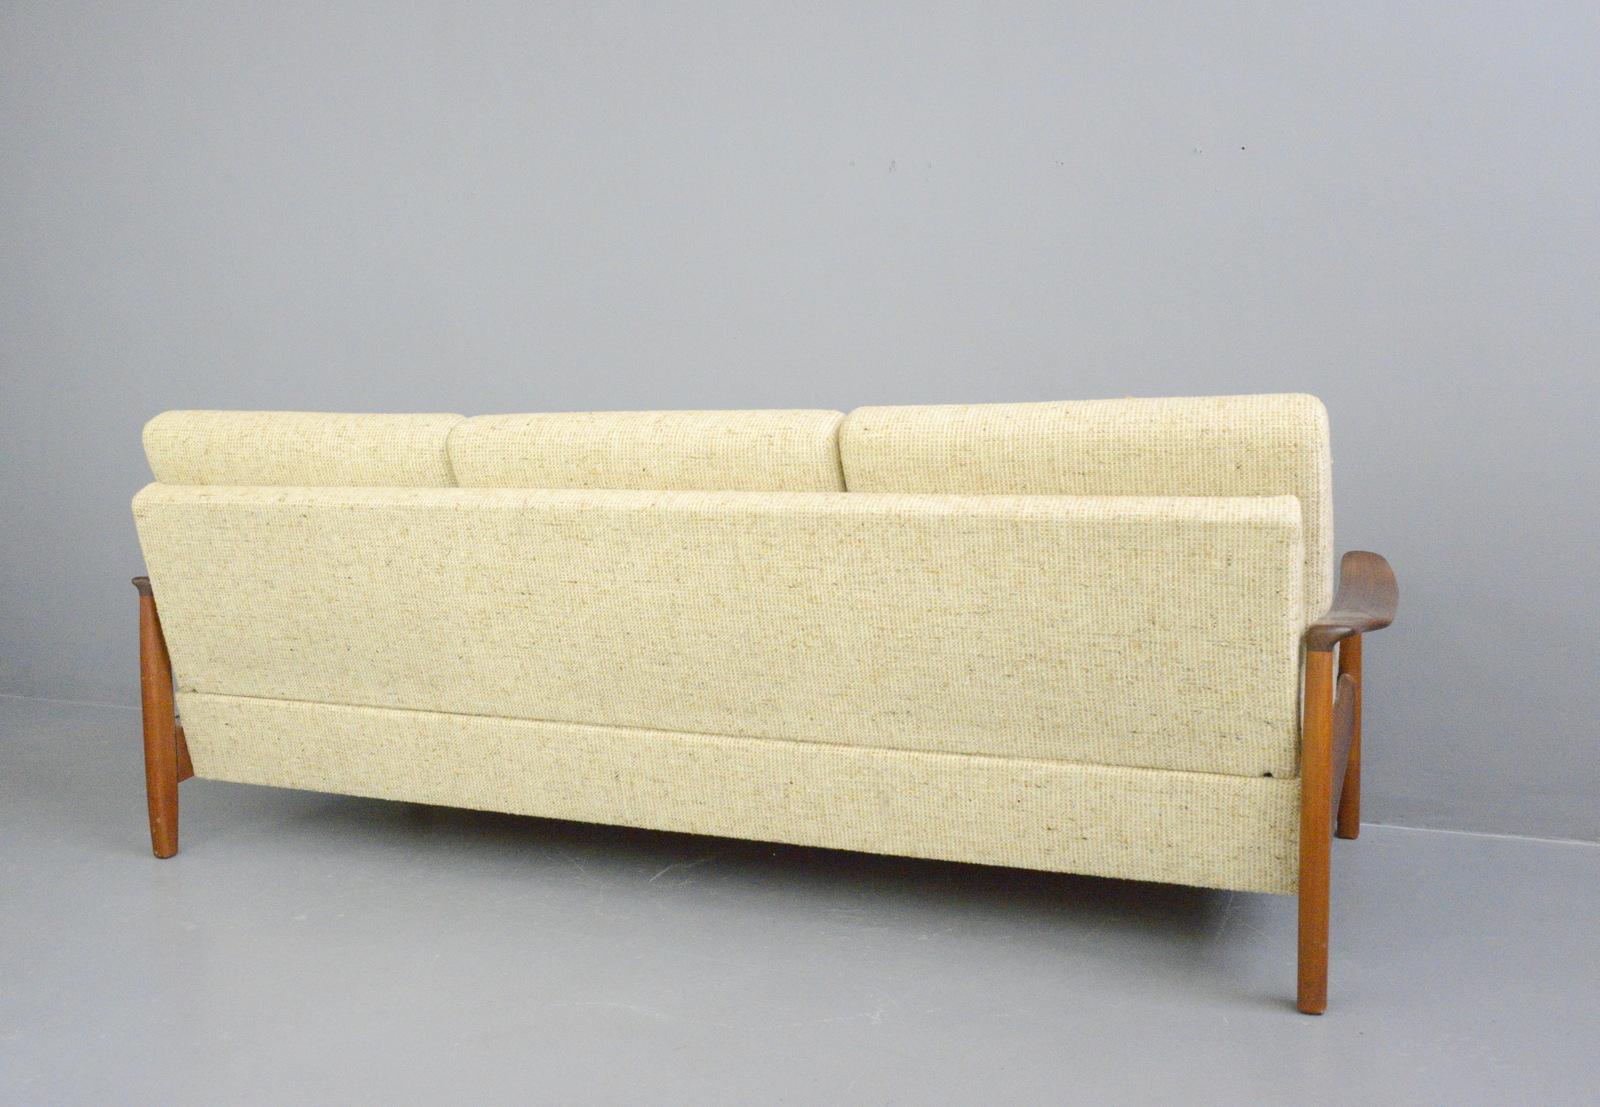 Danish midcentury sofa, circa 1960s

- Original upholstery
- Teak frame
- Folds into a daybed
- Danish, 1960s
- Measures: 208cm wide x 83cm deep x 80cm tall
- 42cm seat height

Condition report:

Very minimal cosmetic wear.